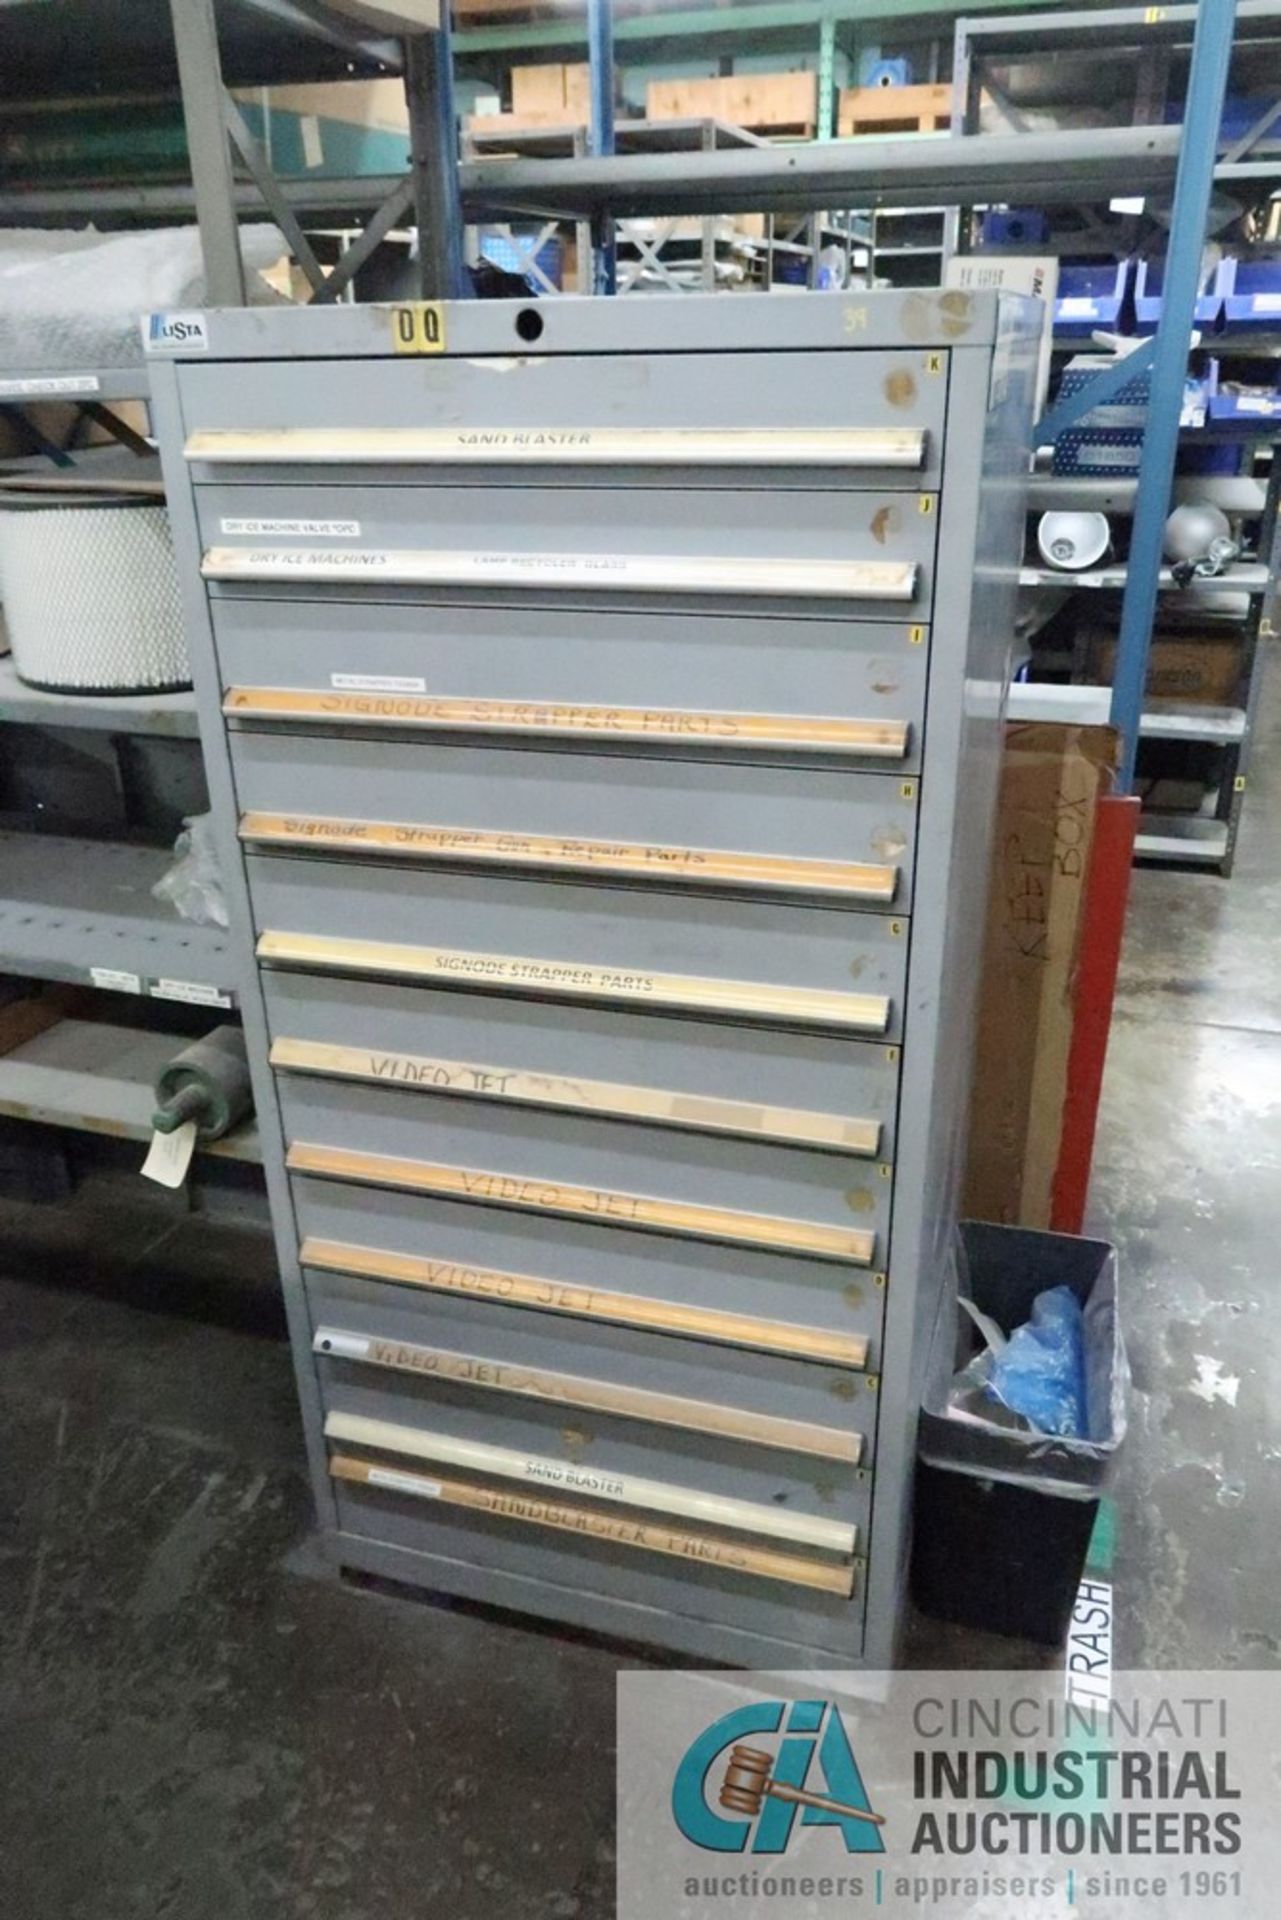 11-DRAWER LISTA CABINET WITH CONTENTS INCLUDING MISCELLANEOUS PARTS FOR SANDBLASTER, DRY ICE